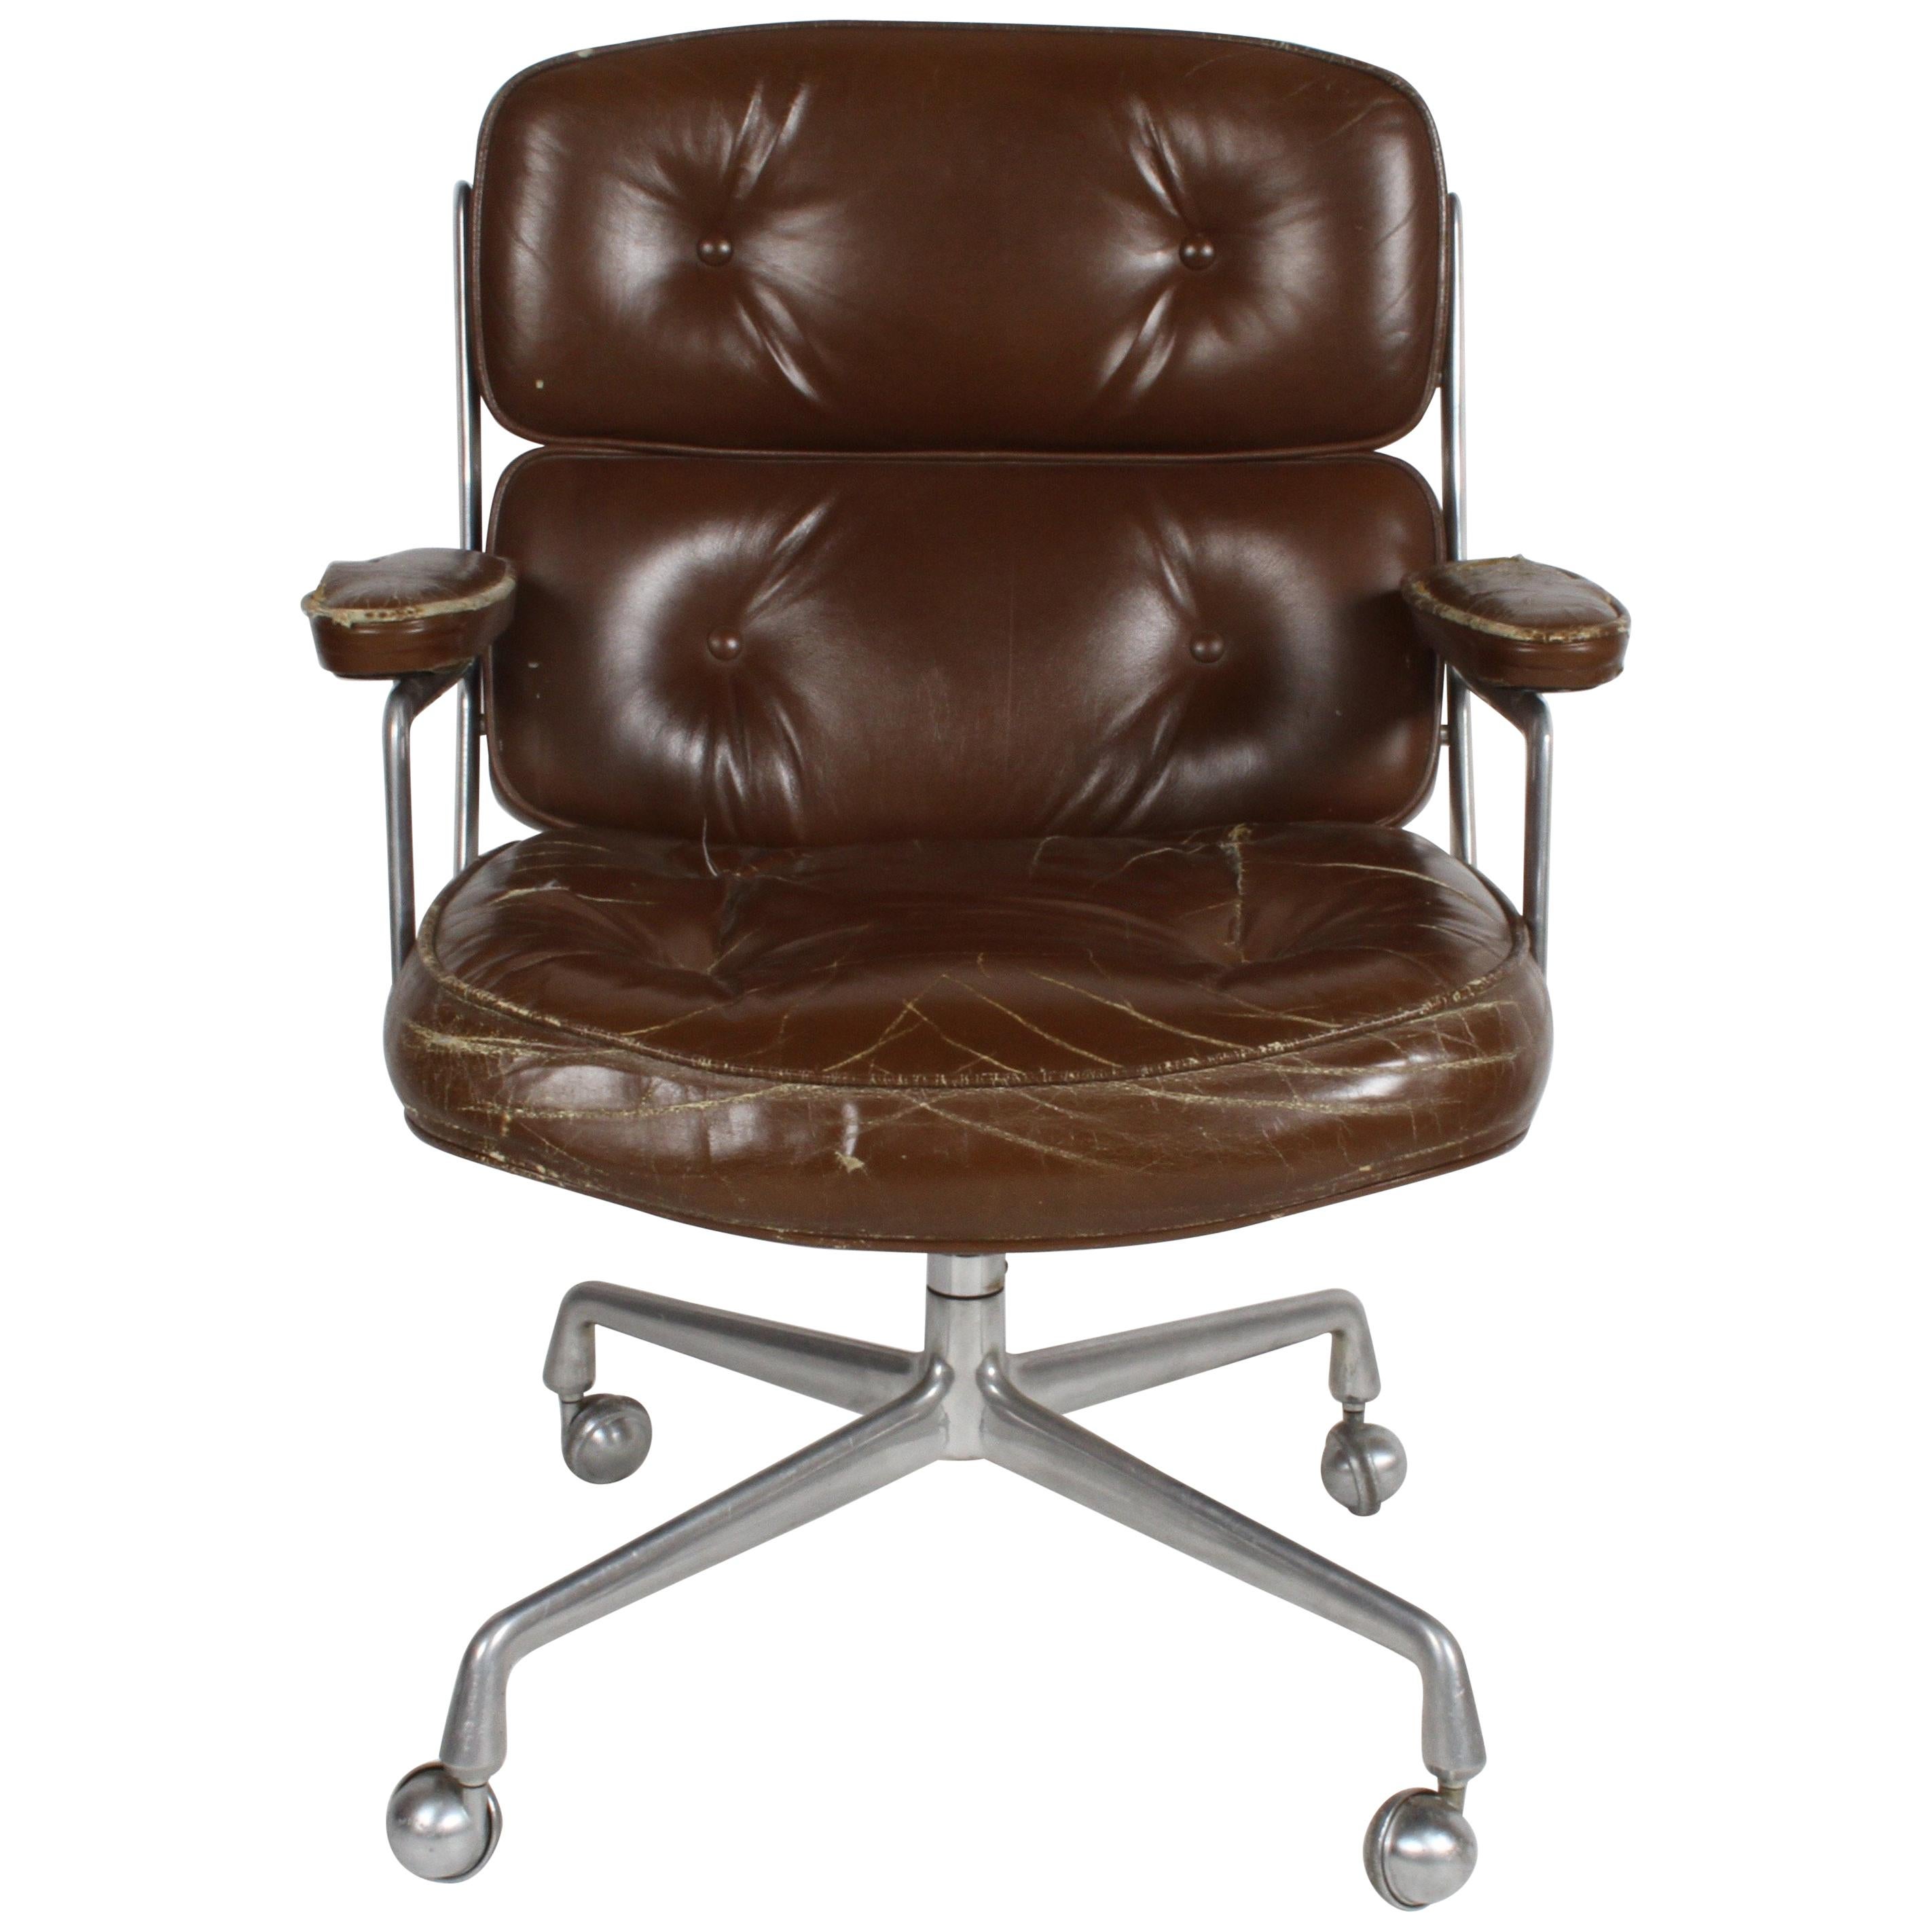 Charles Eames for Herman Miller "Time Life" Executive Chair